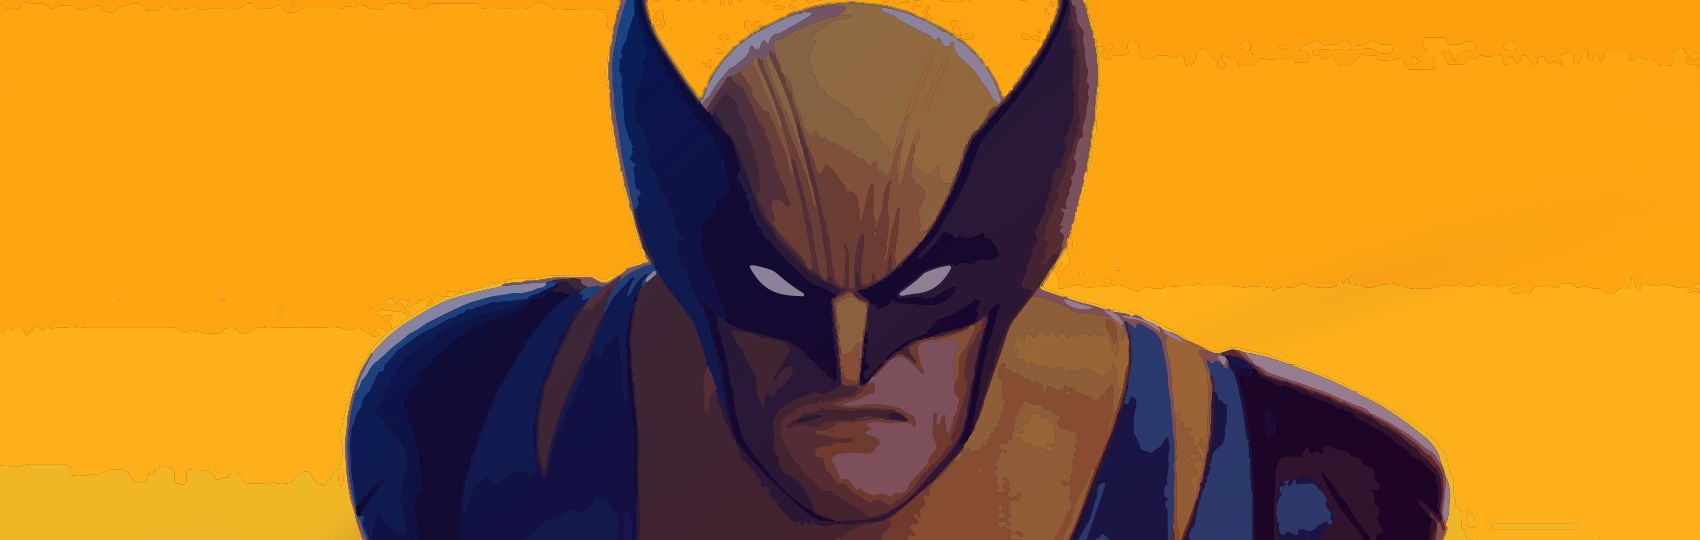 Wolverine in Fortnite! Are you ready for new challenges?